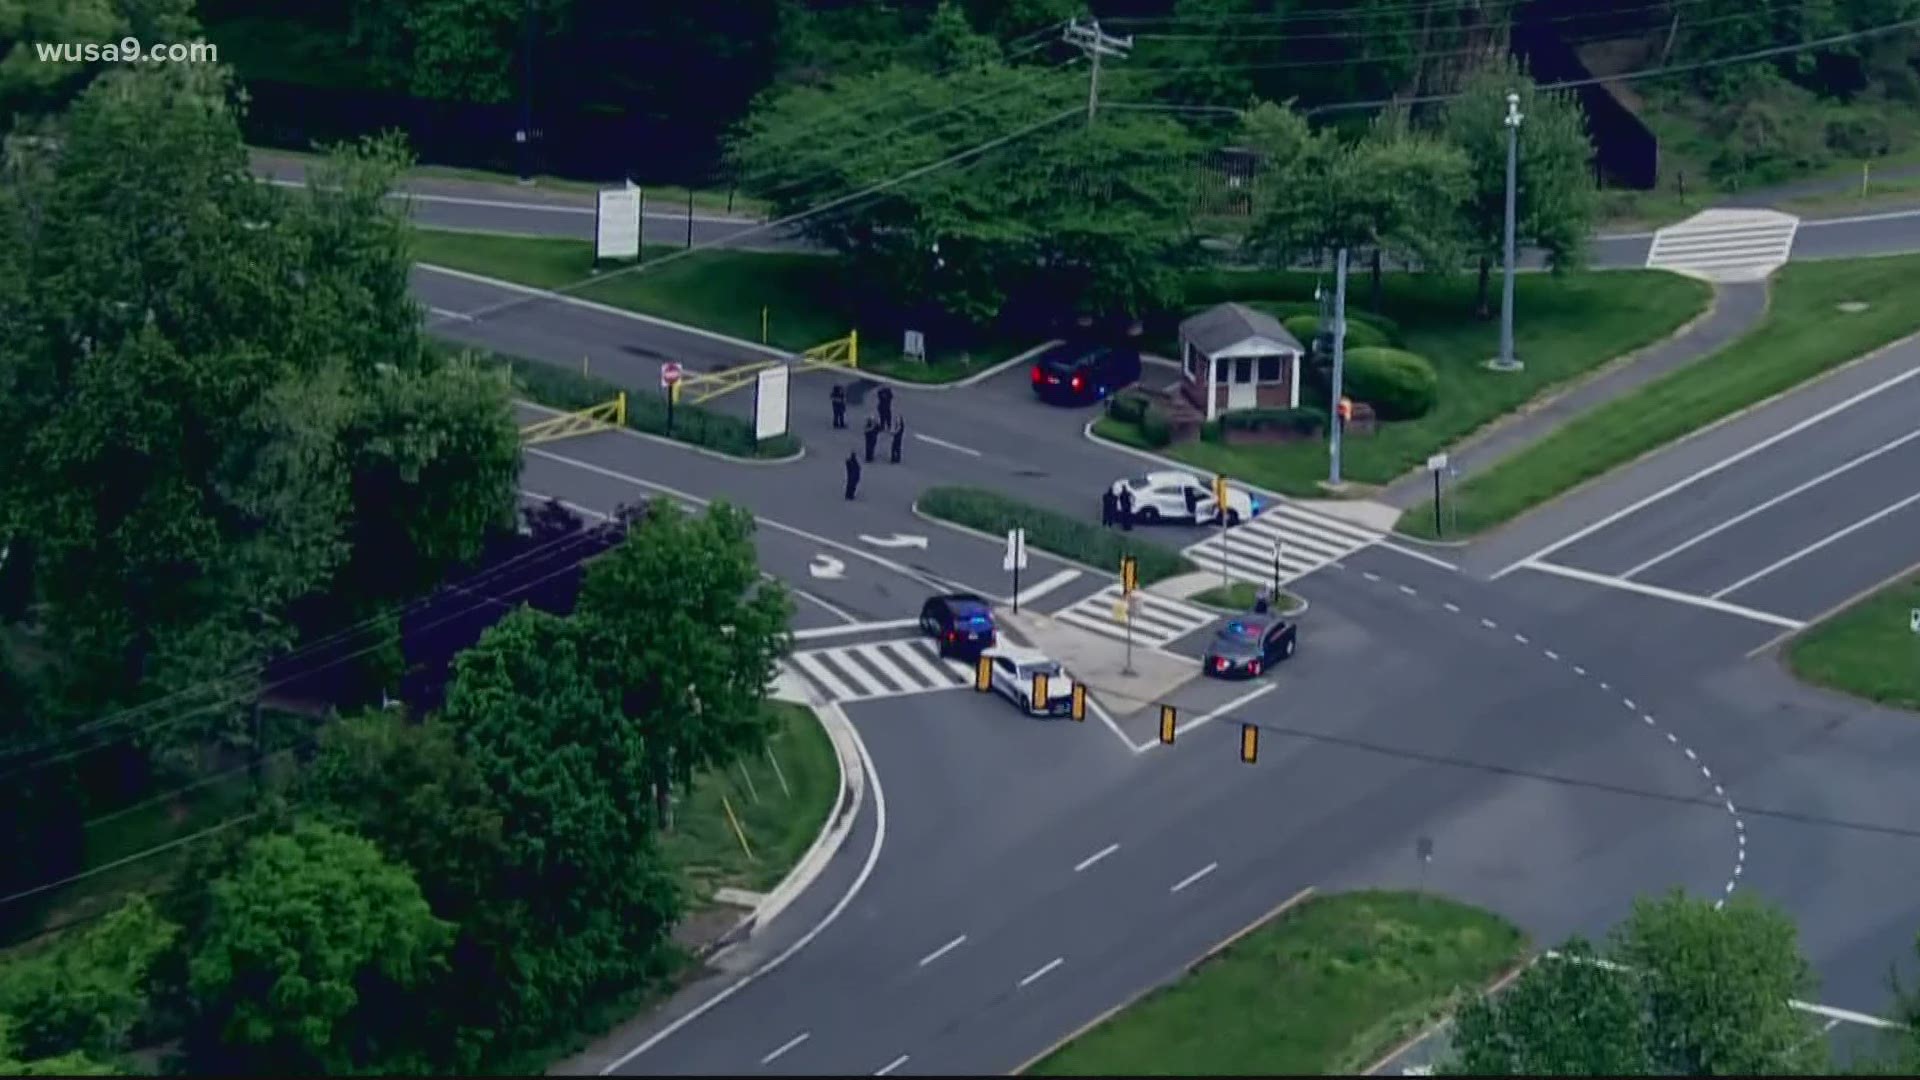 The FBI said law enforcement officers shot an armed man outside the Central Intelligence Agency headquarters in McLean Monday.